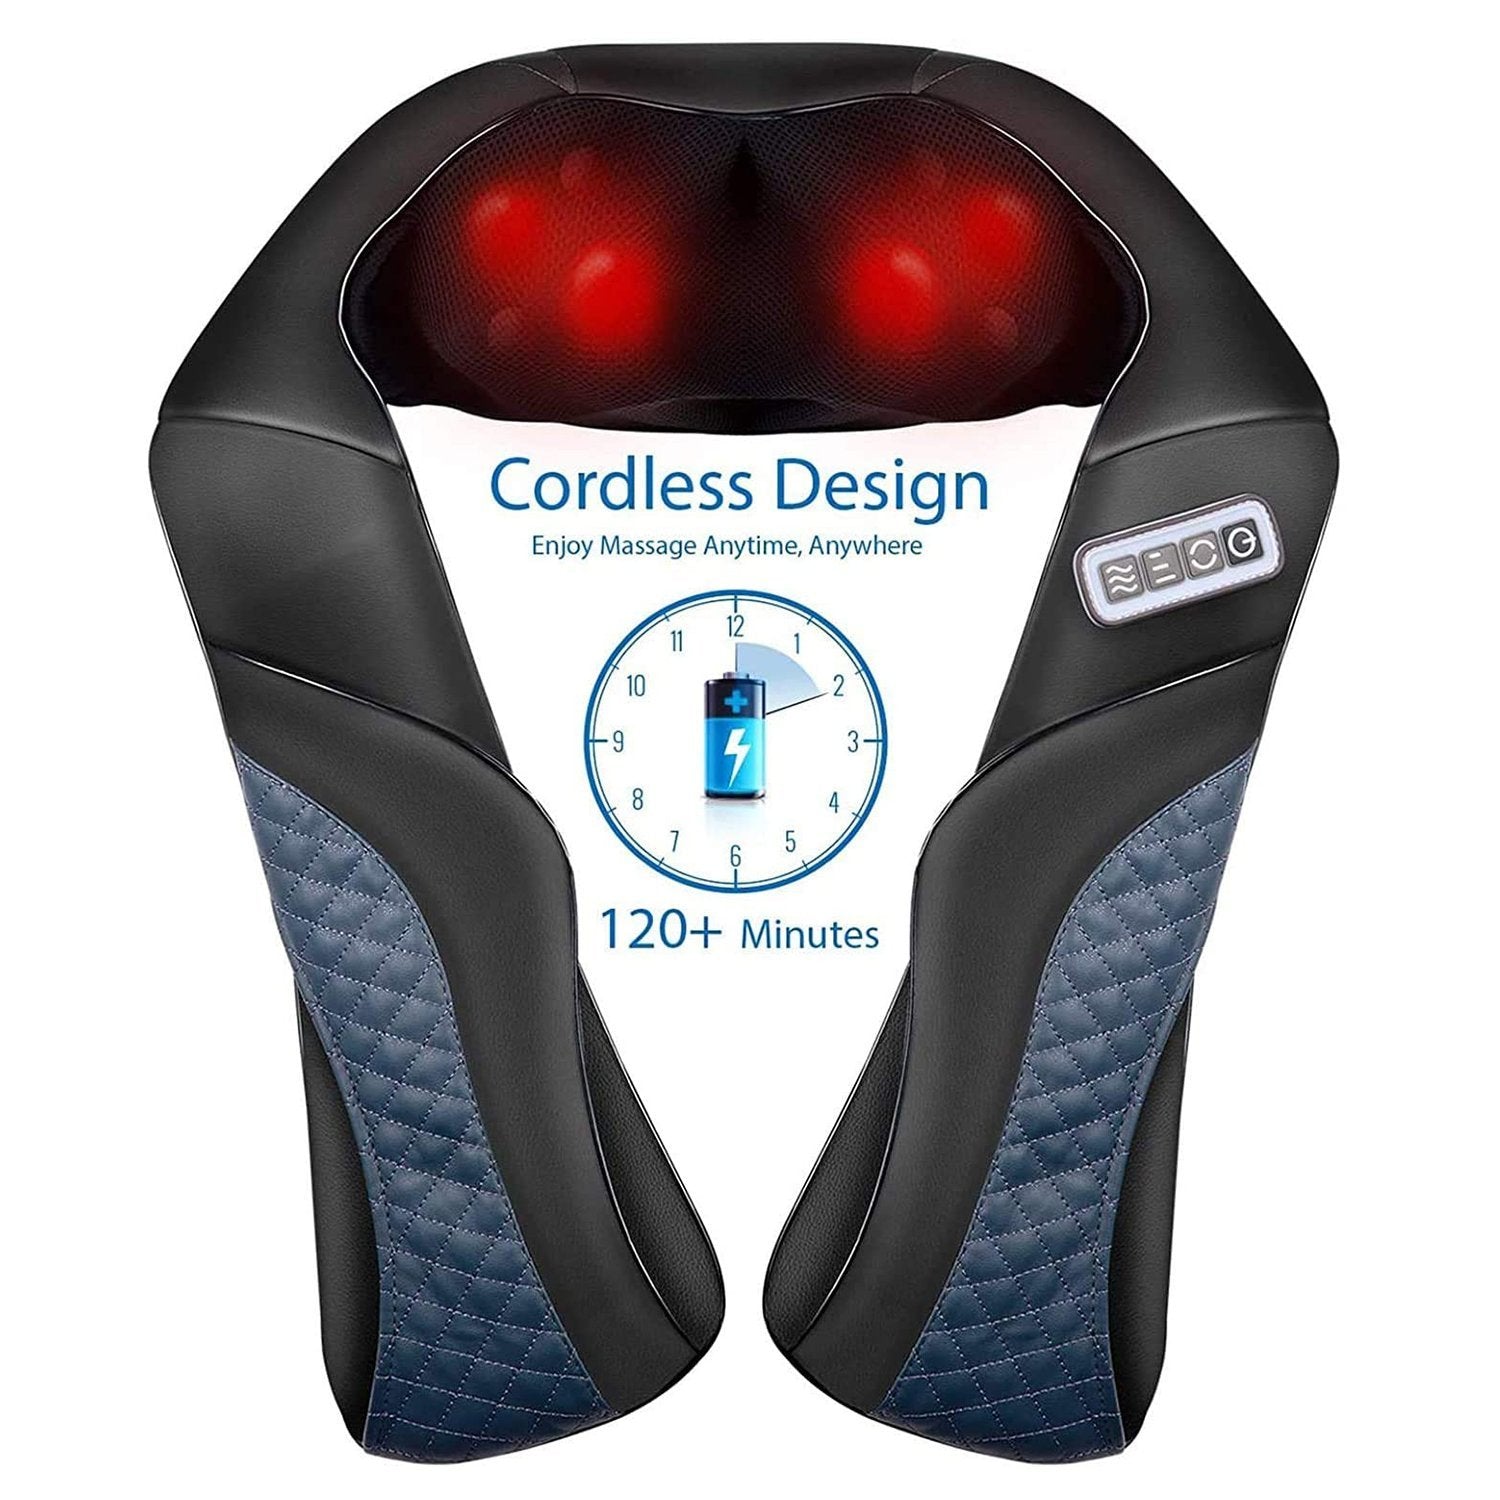 CLEARANCE! Pallet - 60 Pcs - MaxKare XKMS-412R Cordless Rechargeable  Shoulder Massager - Brand New - Retail Ready